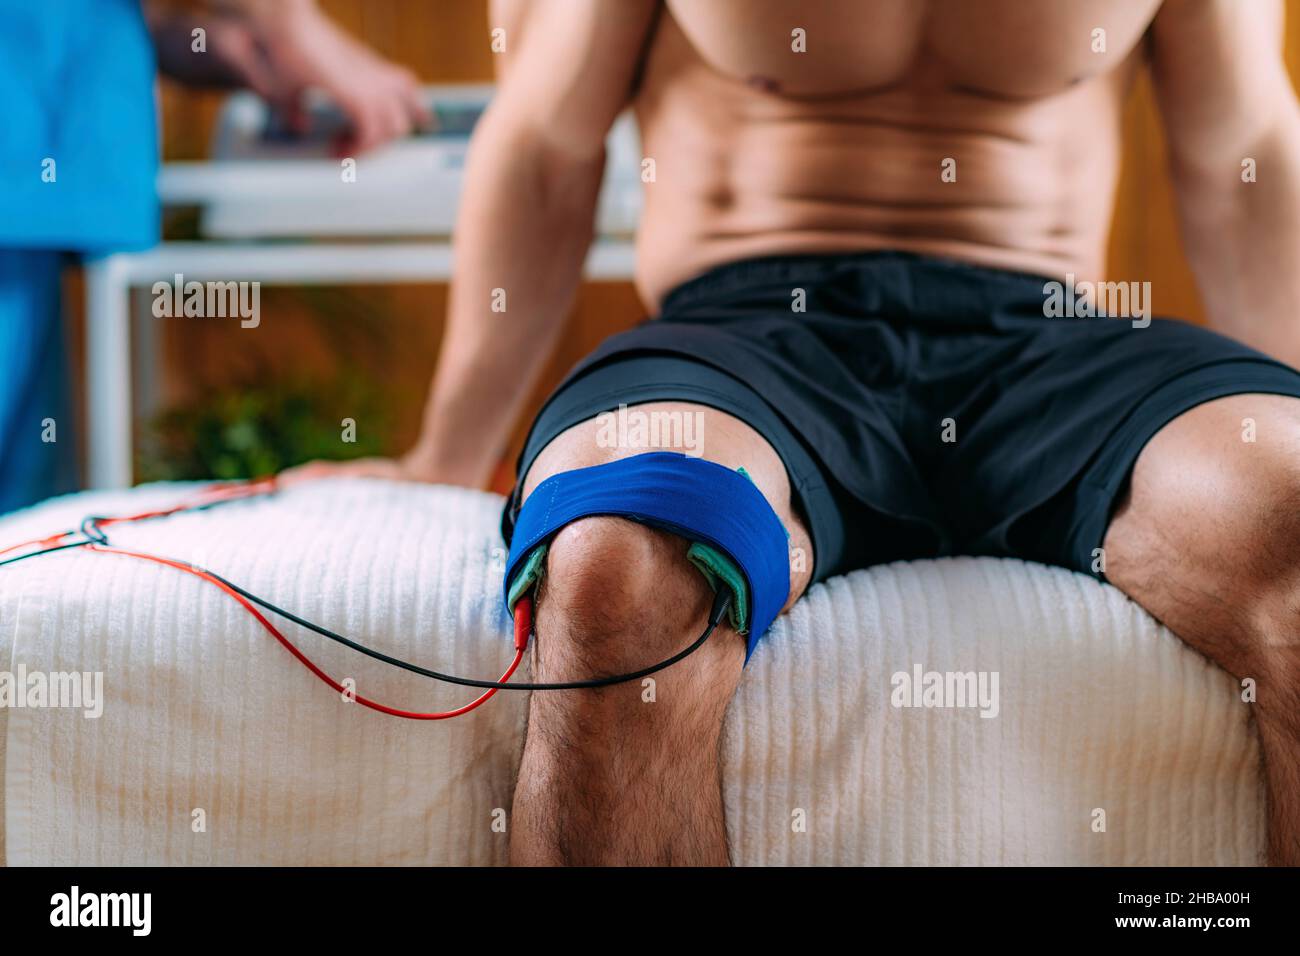 https://c8.alamy.com/comp/2HBA00H/tens-transcutaneous-electrical-nerve-stimulation-knee-physical-therapy-2HBA00H.jpg